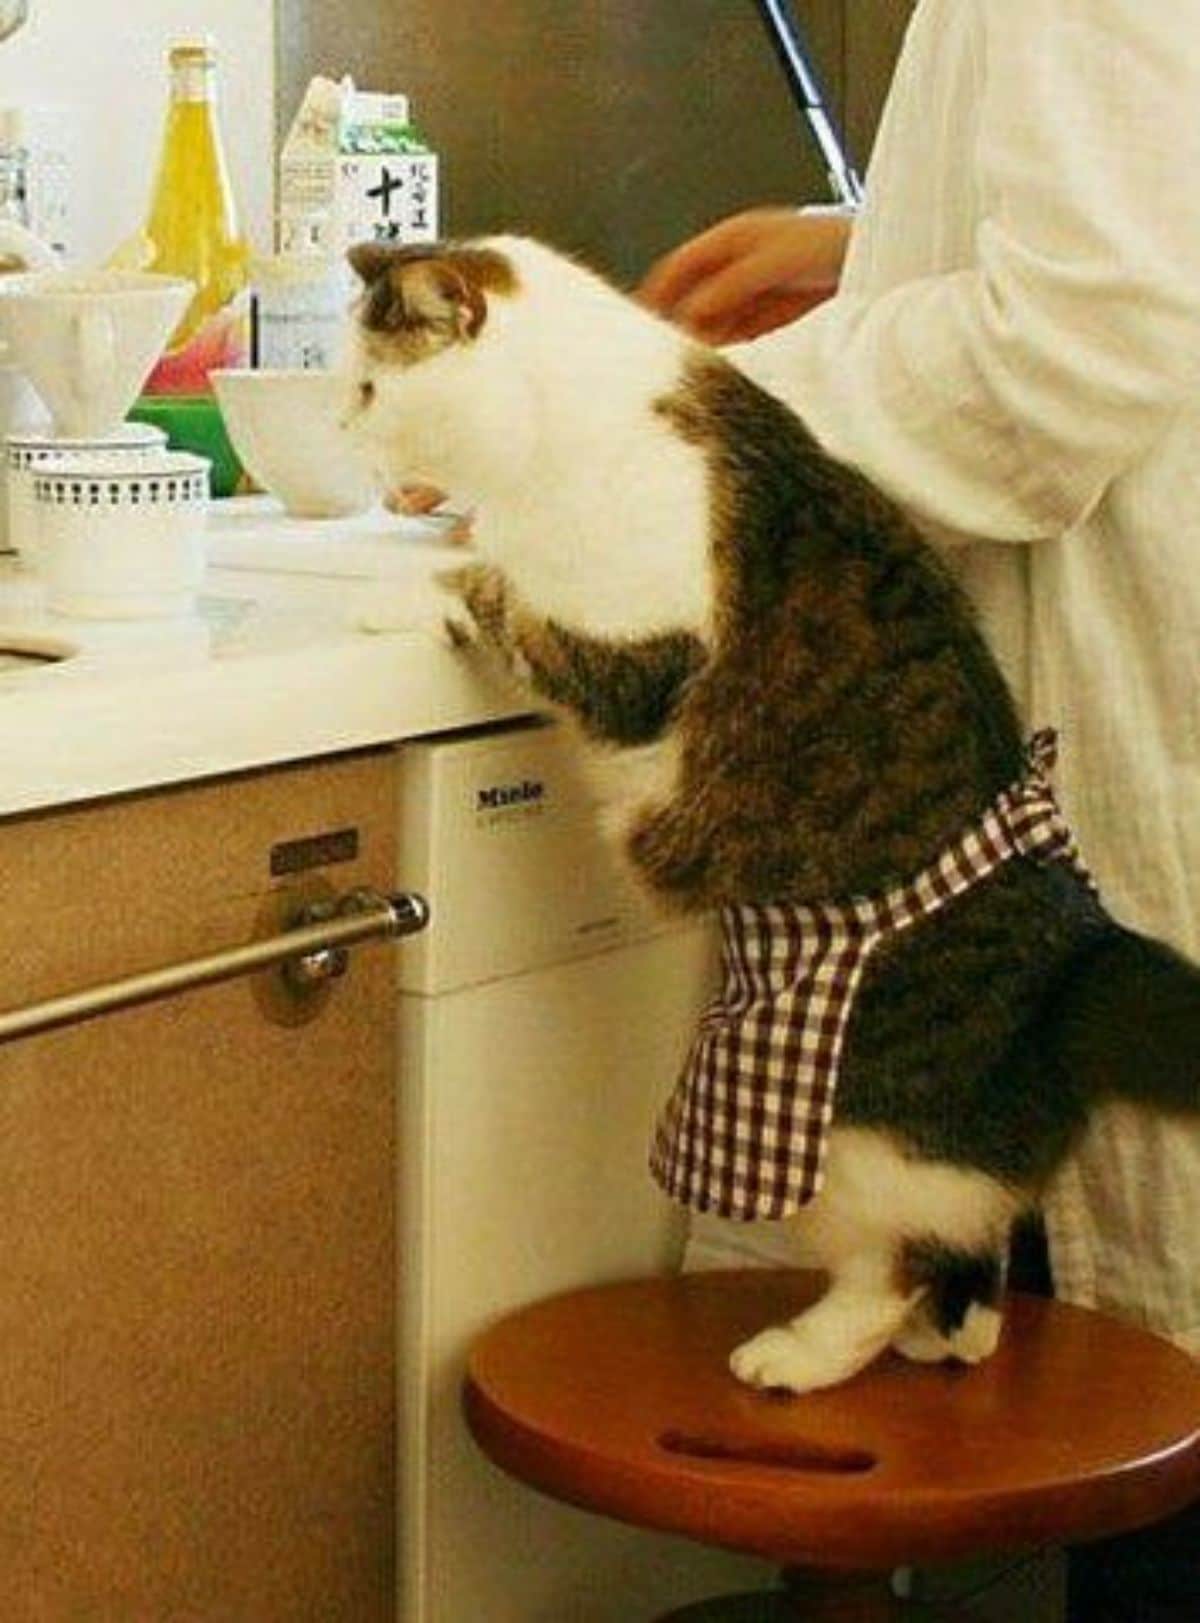 grey and white tabby cat standing on hind legs on a stool at a kitchen counter with a person next to it